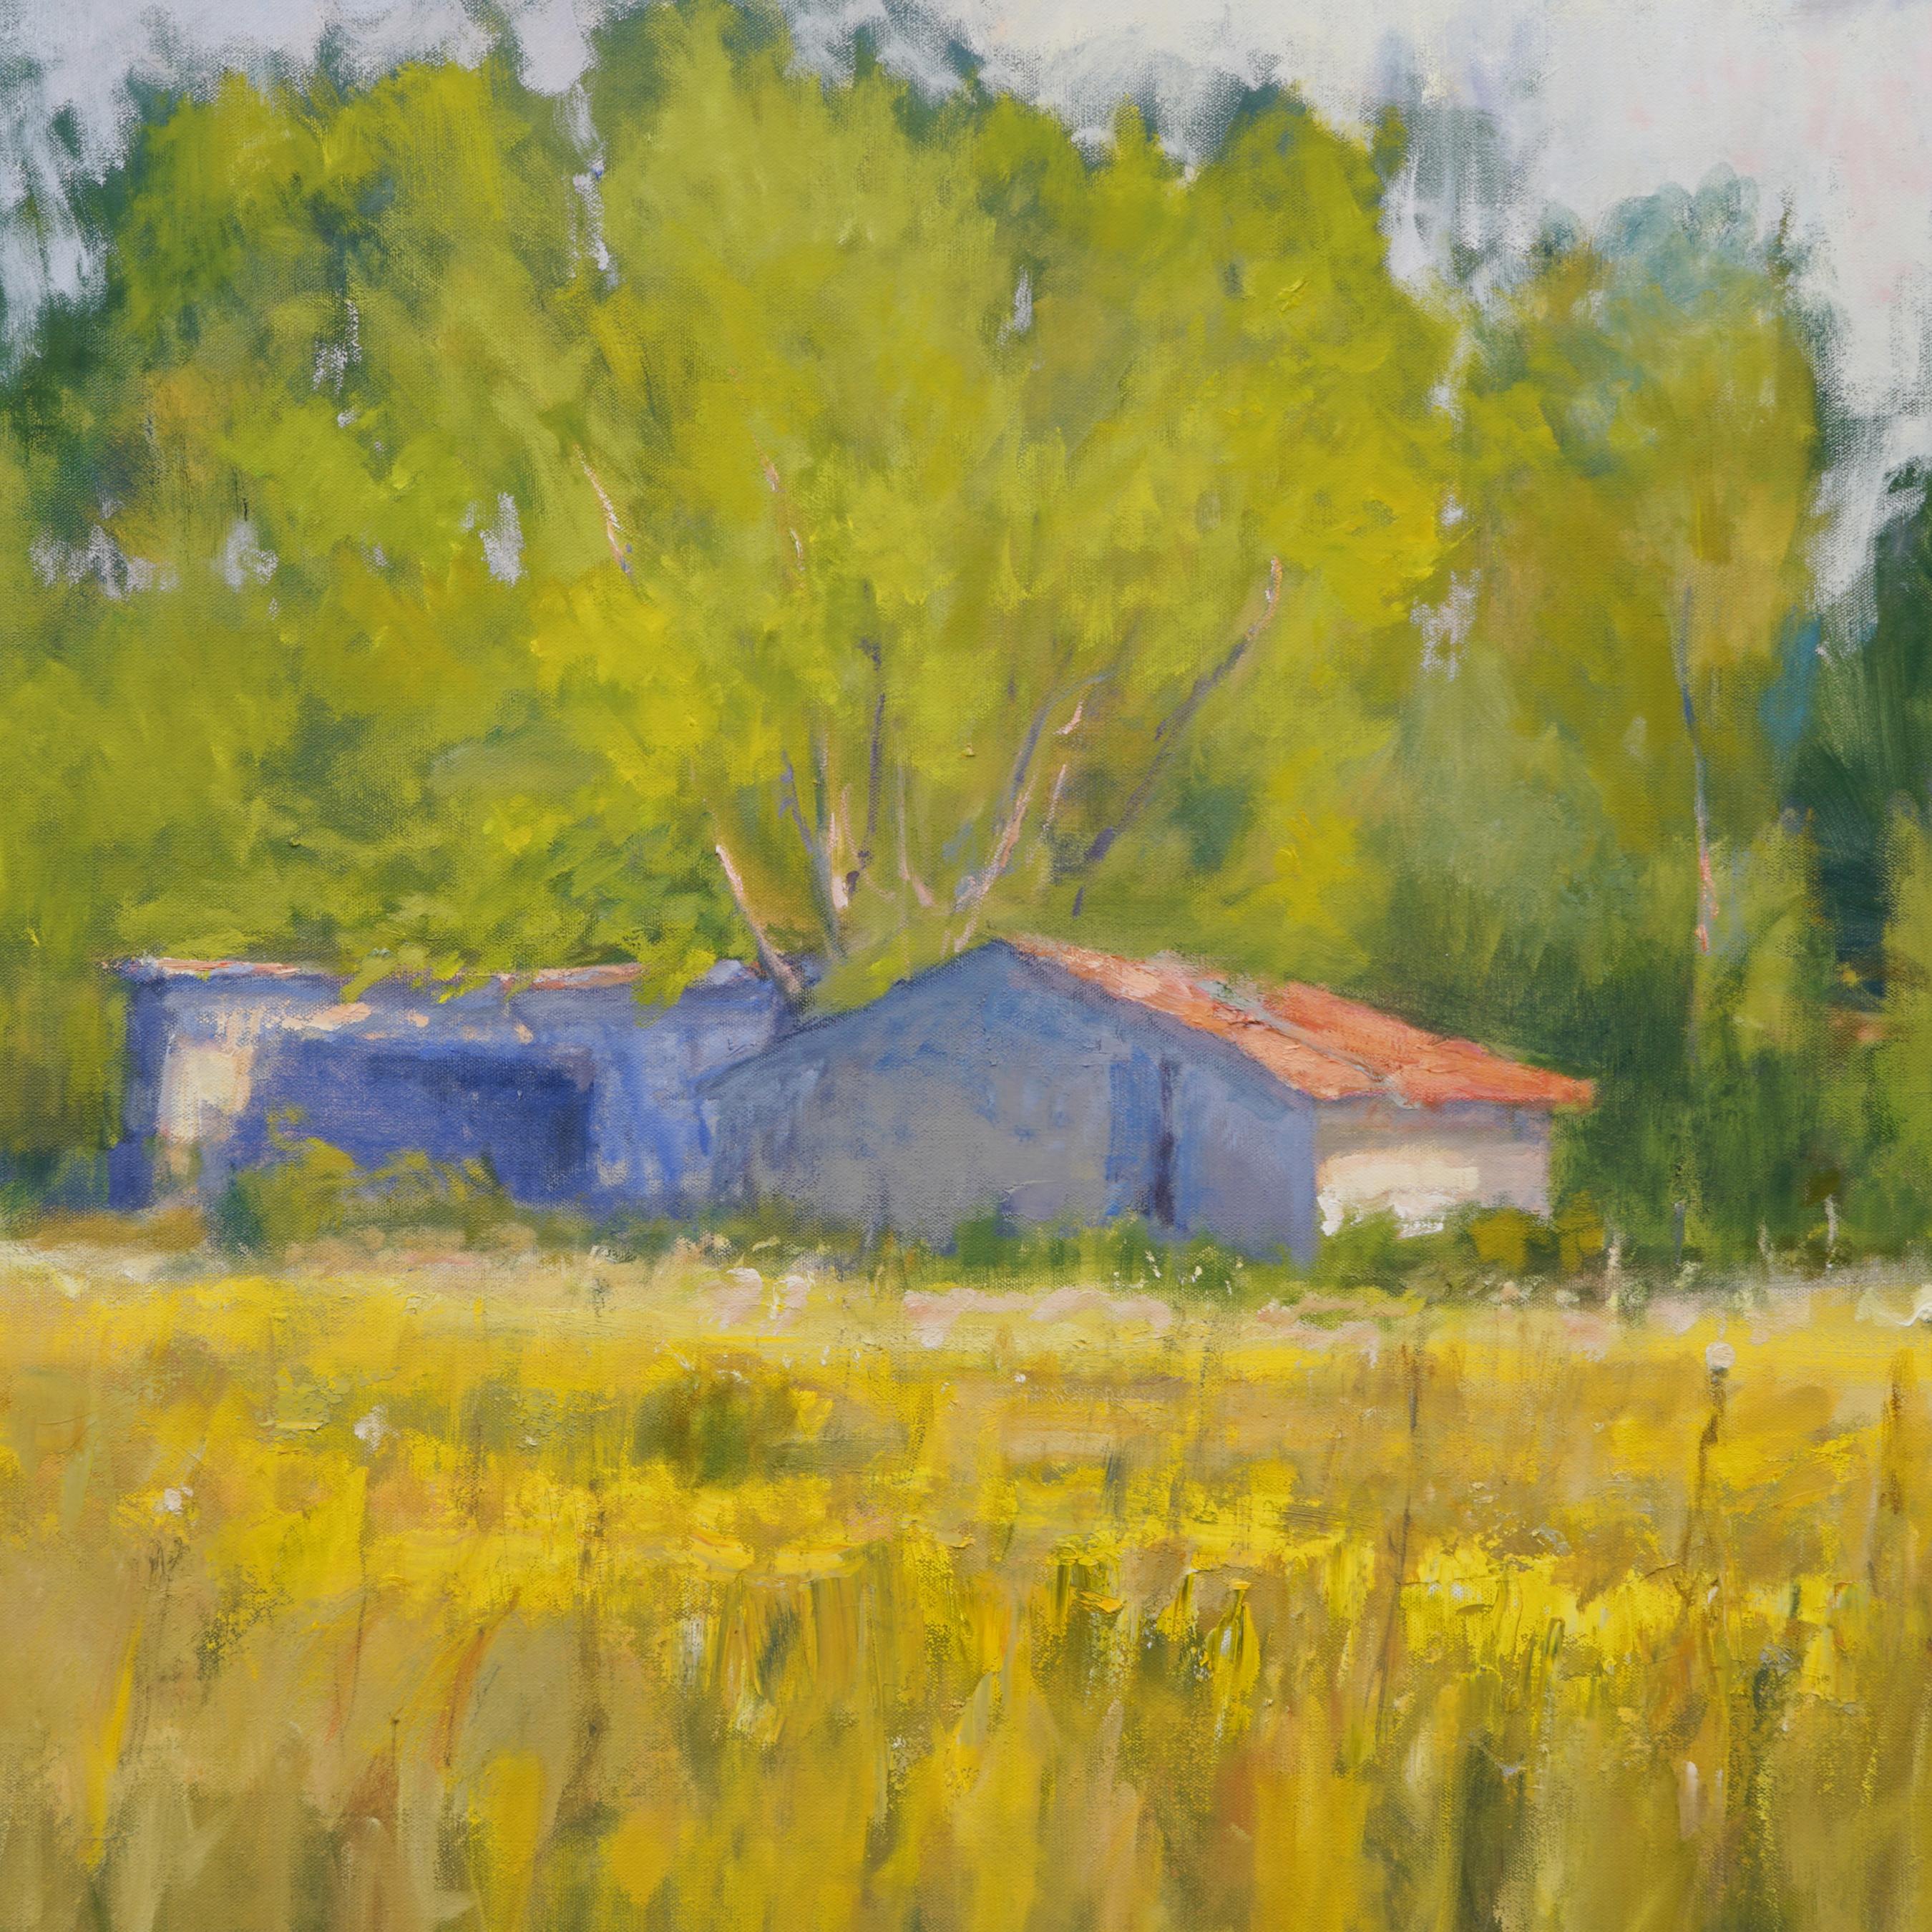  Late Afternoon , Texas Landscape, Oil, American Impressionism, Barn, Sun 36x36 - Painting by Steve Parker